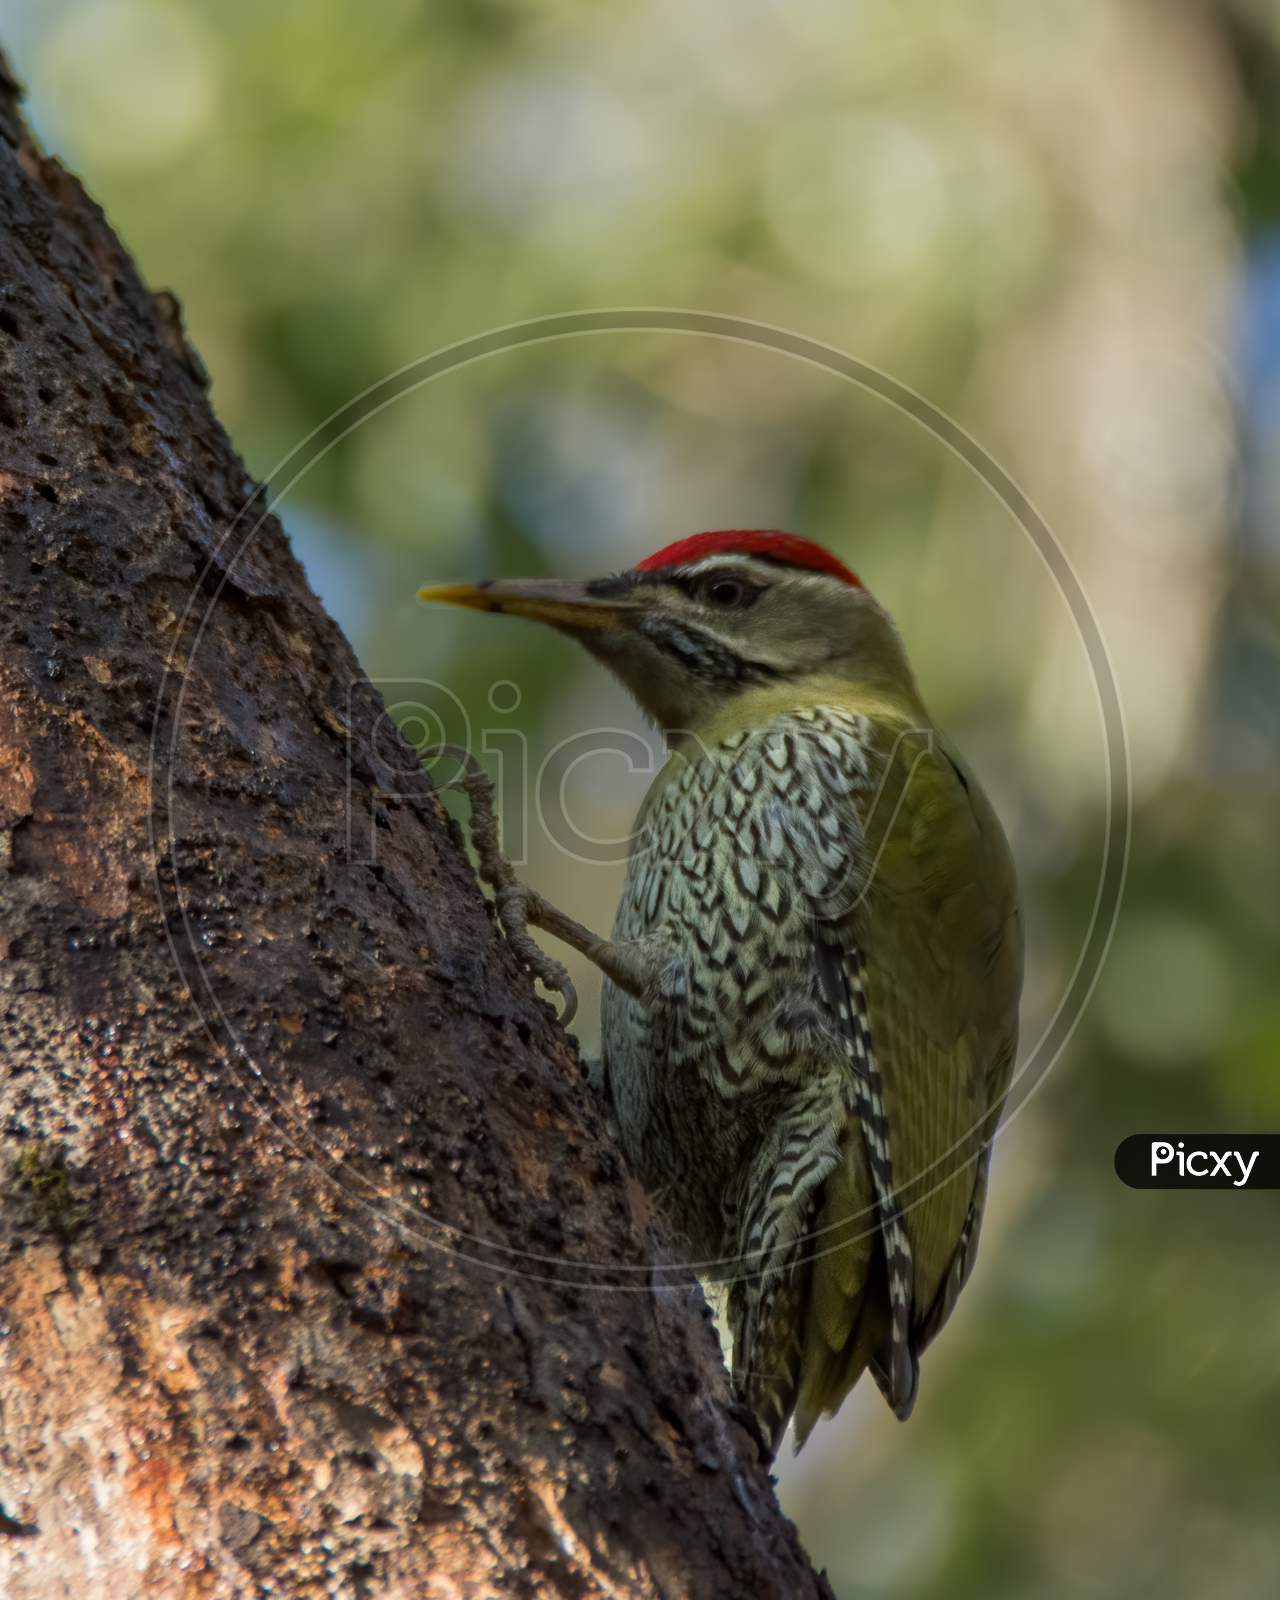 Male Scaly-Bellied Woodpecker Perched On A Tree Trunk